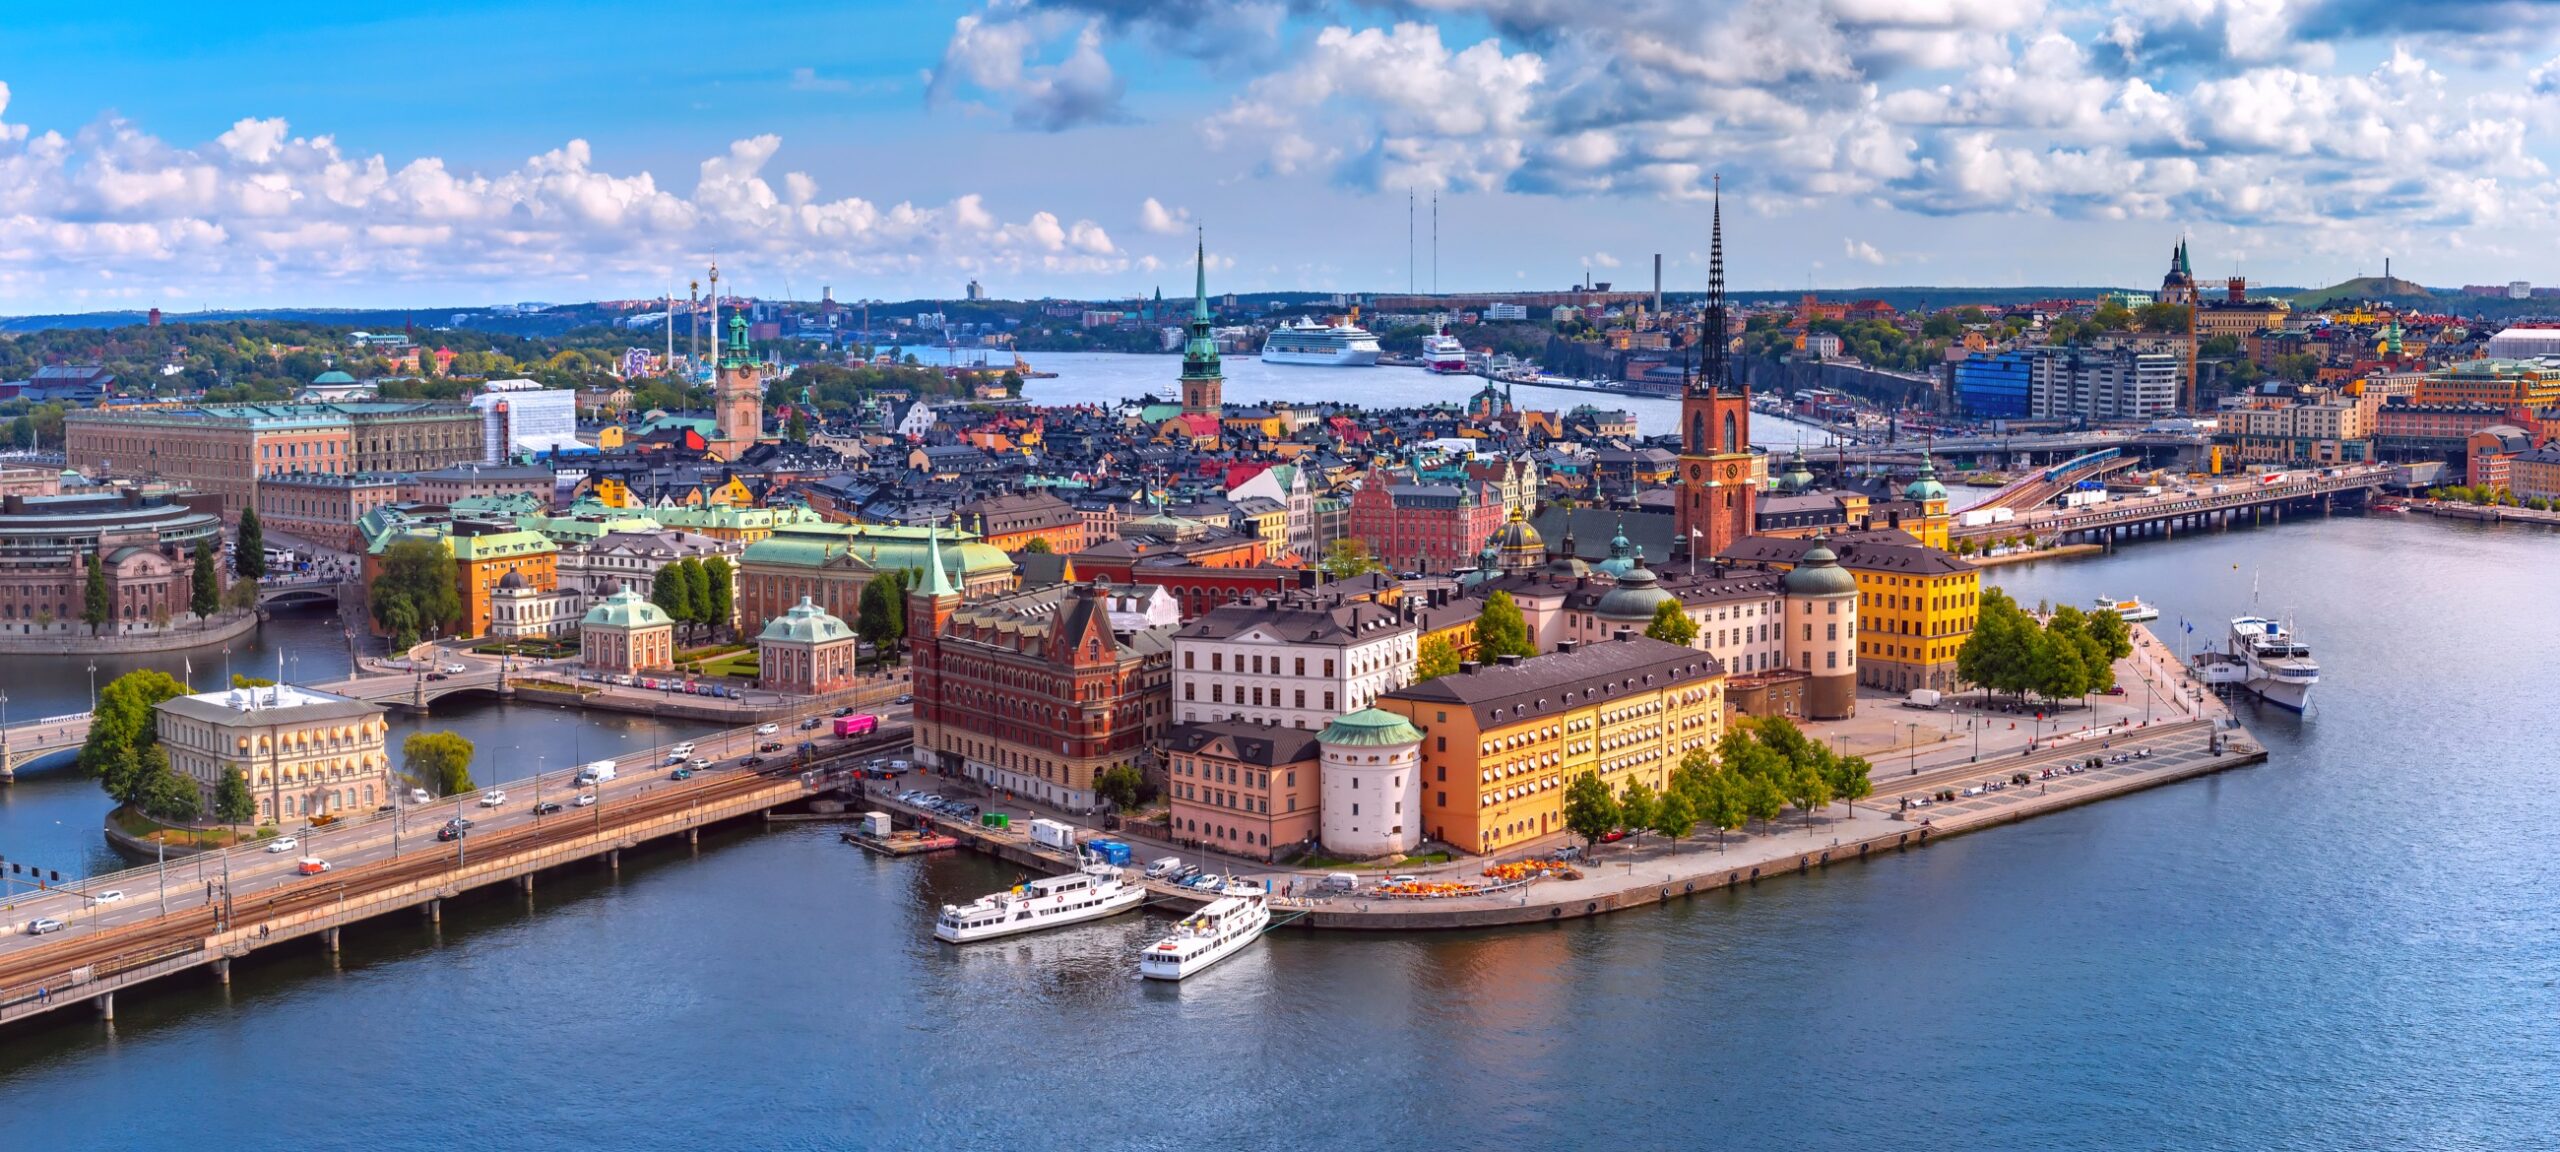 Stockholm: The Scandinavian City of Islands and More